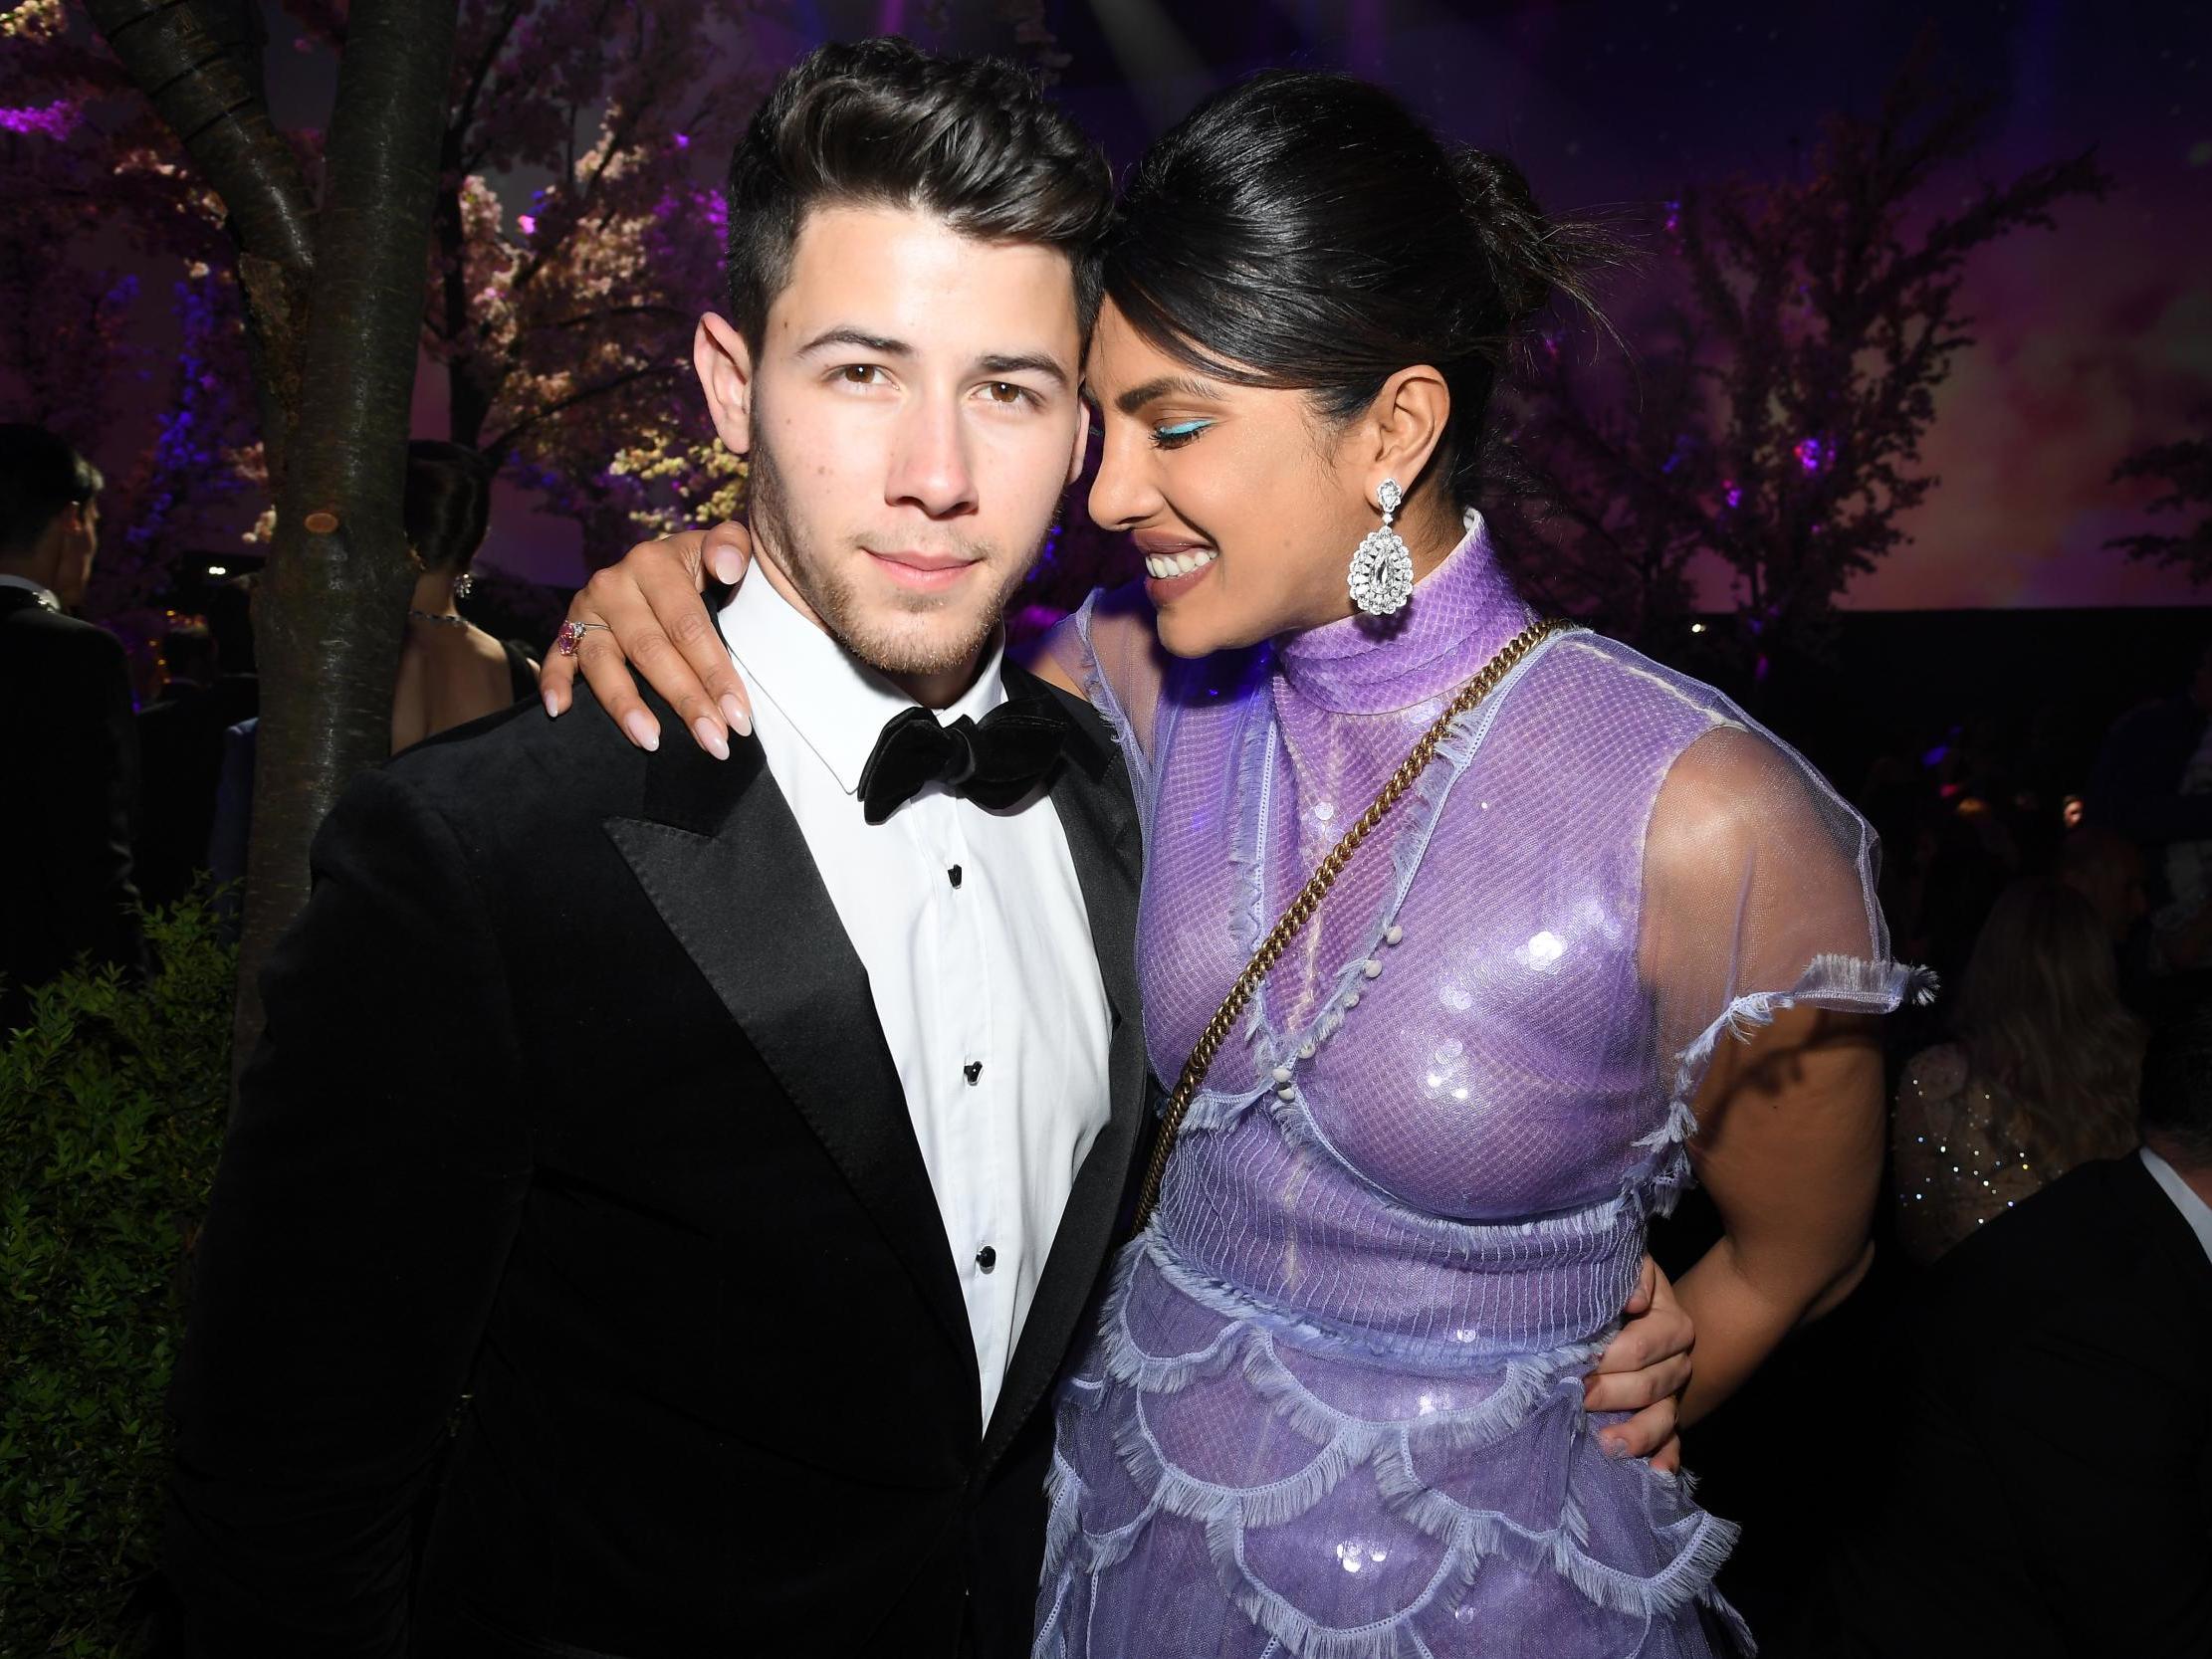 Priyanka Chopra Xxx Hd Videos - Priyanka Chopra says having a baby with Nick Jonas is on her 'to do' list in  Vogue India interview | The Independent | The Independent